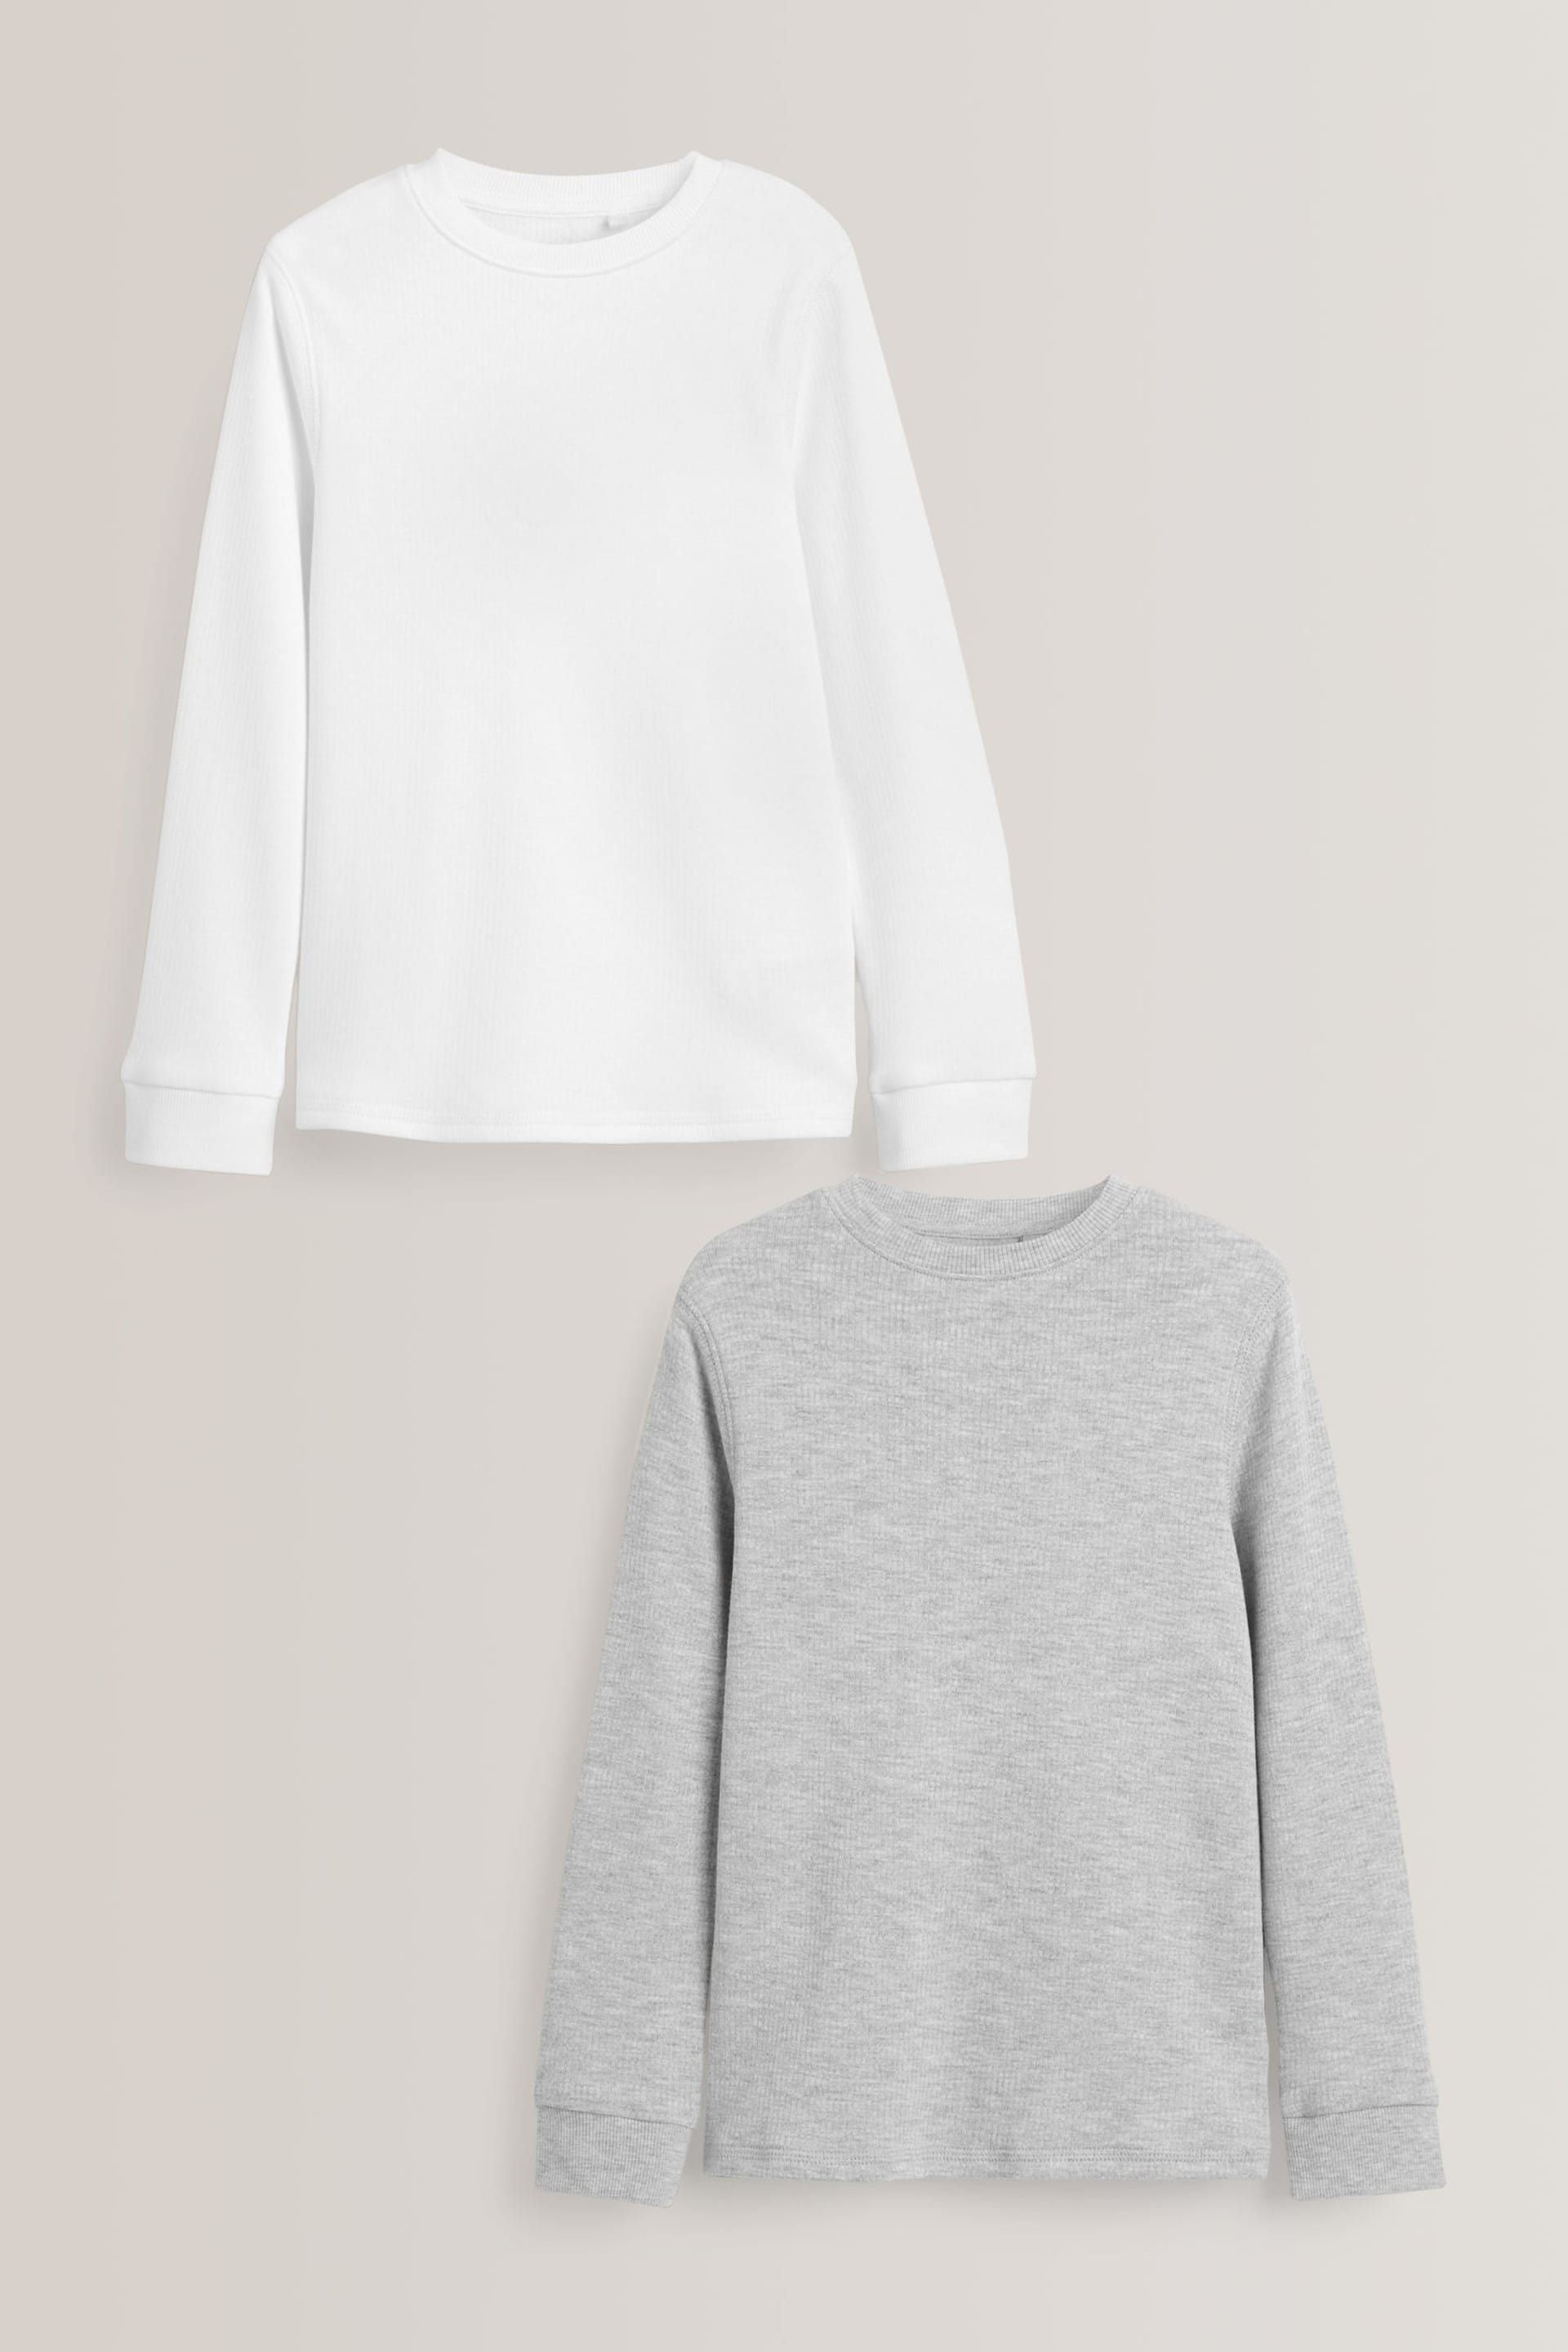 Grey/White Long Sleeve Thermal Tops 2 Pack (2-16yrs) - Image 1 of 5